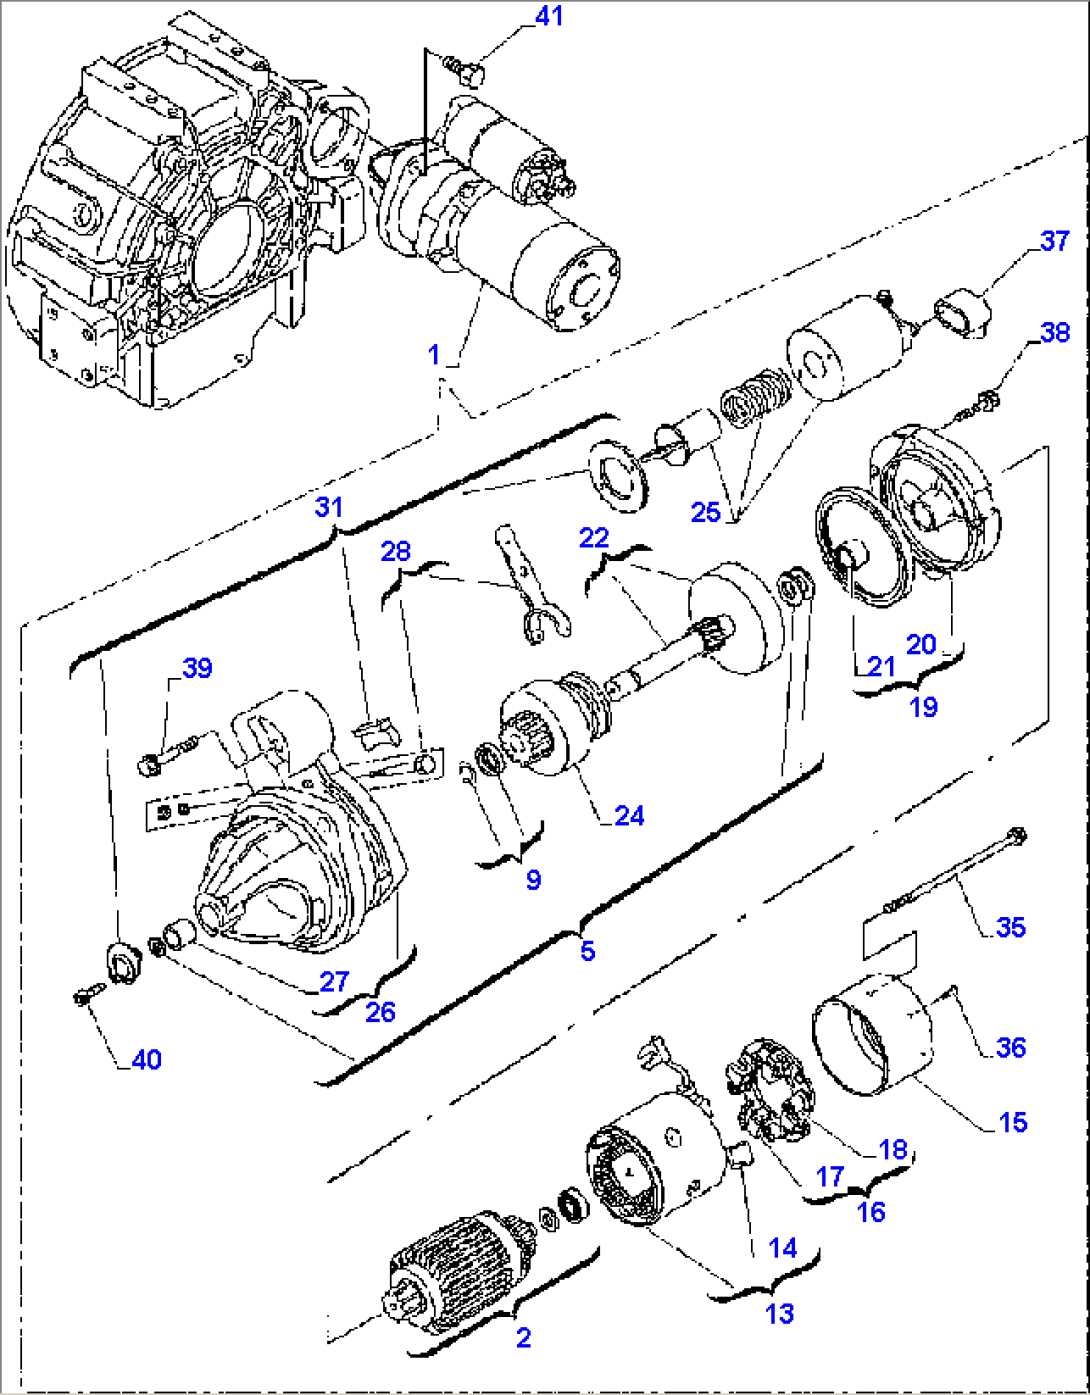 FIG. A0611-01A0 STARTING MOTOR